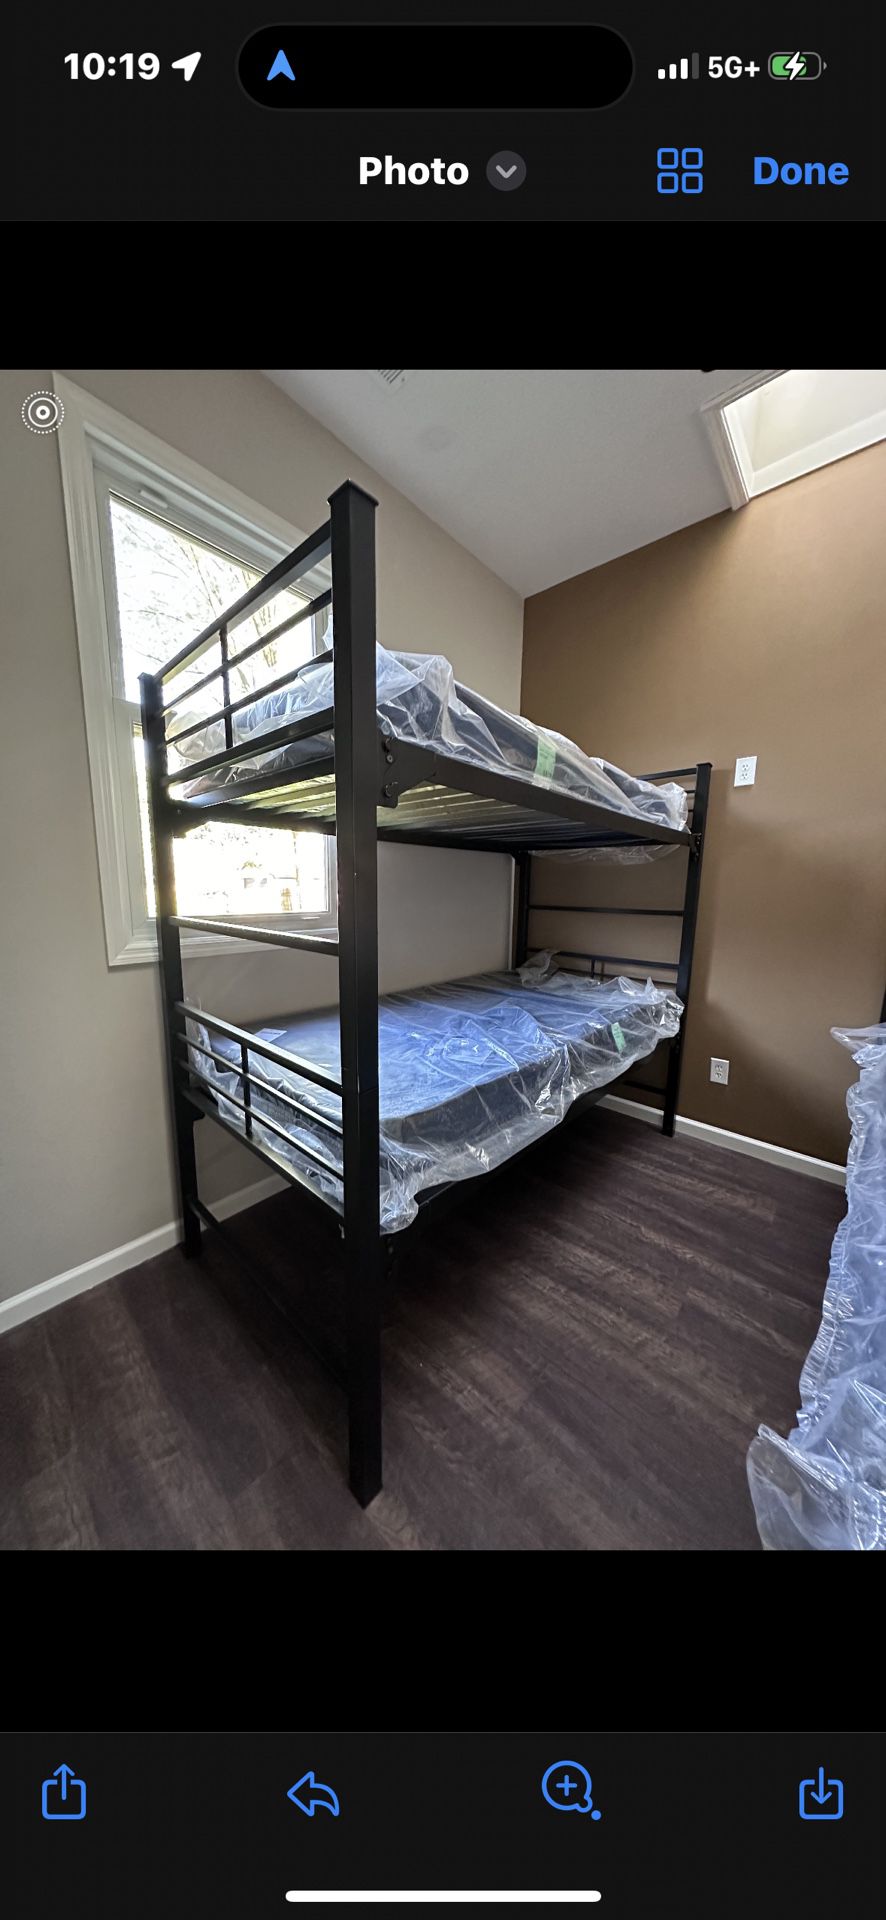 HEAVY DUTY COMMERCIAL GRADE MT6000 METAL SINGLE AND/OR  BUNK BED  W/ MATTRESS